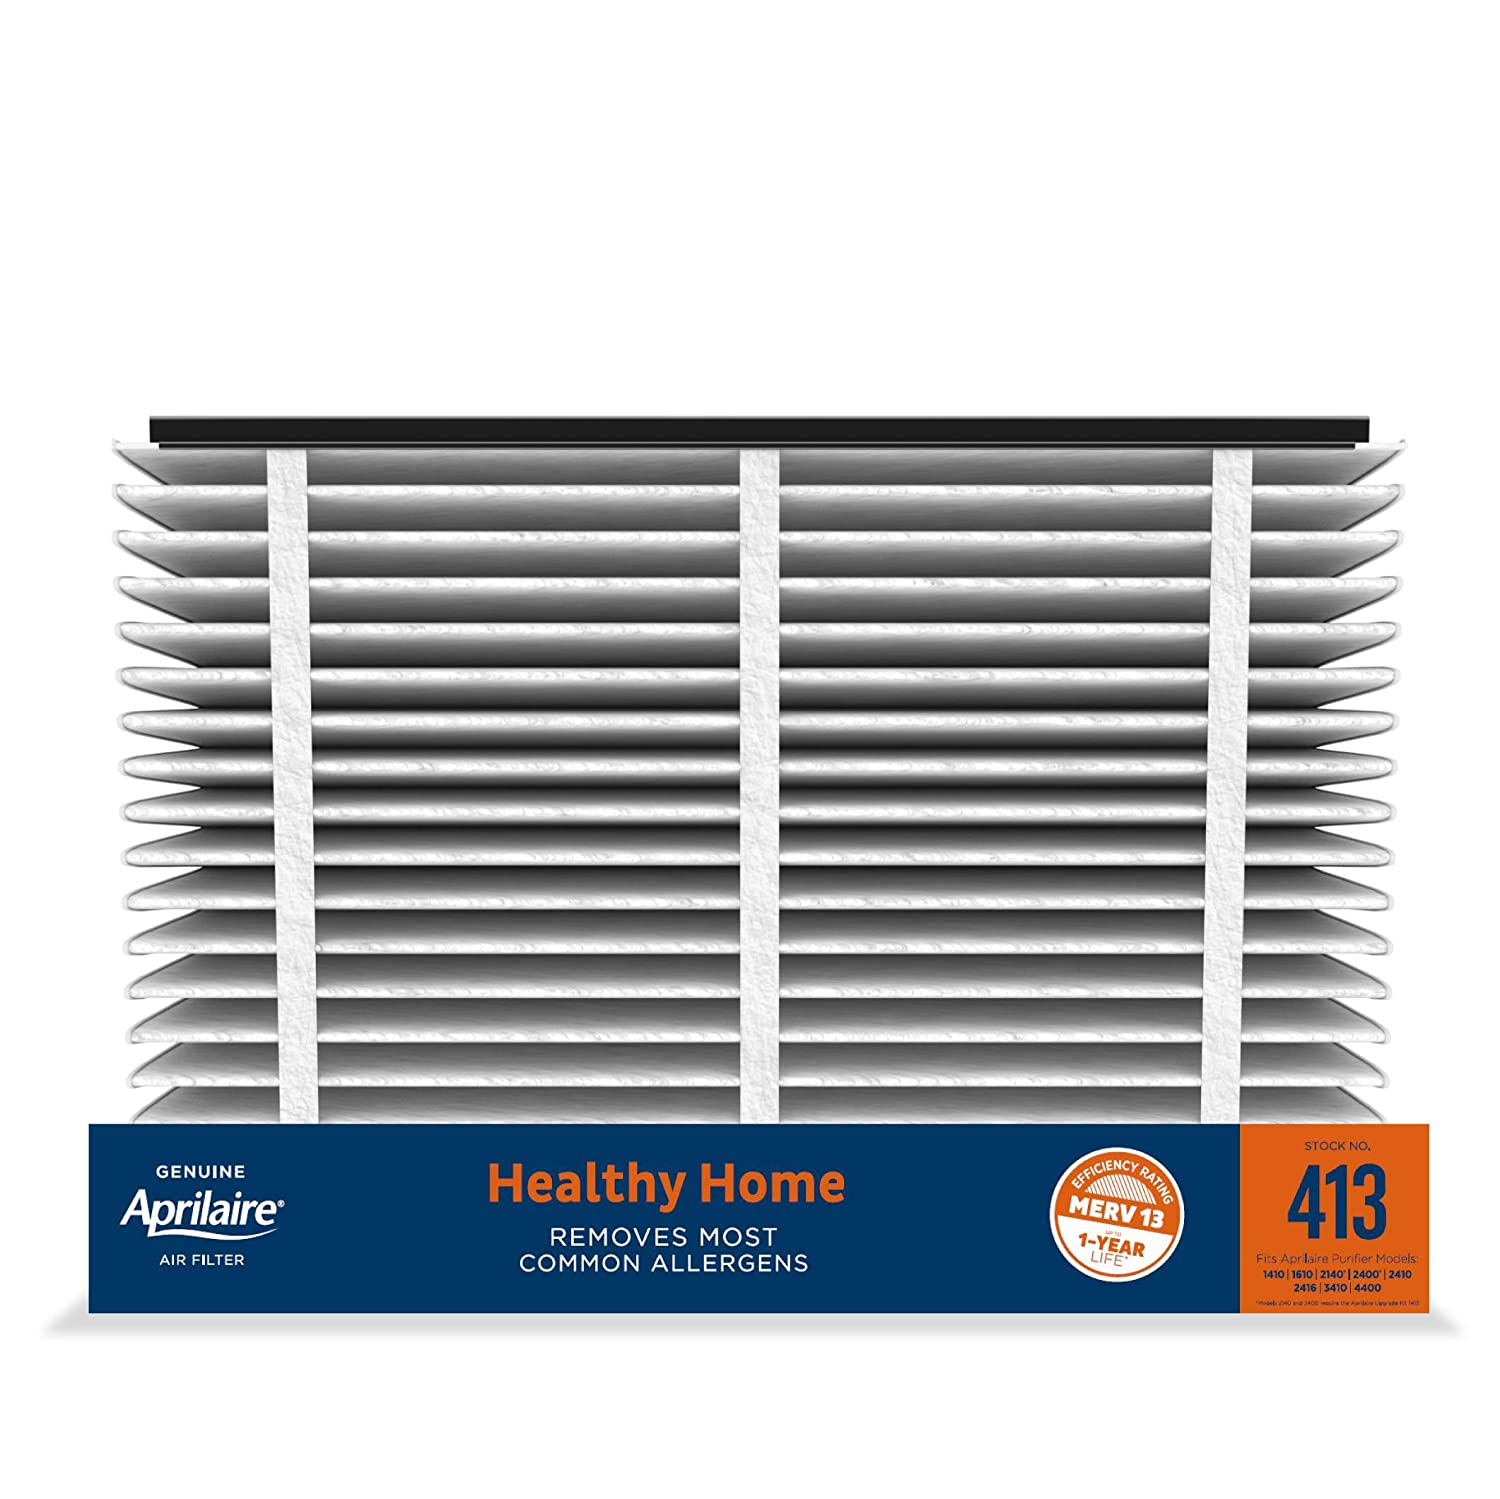 Aprilaire 413 “Healthy Home” Air Filter